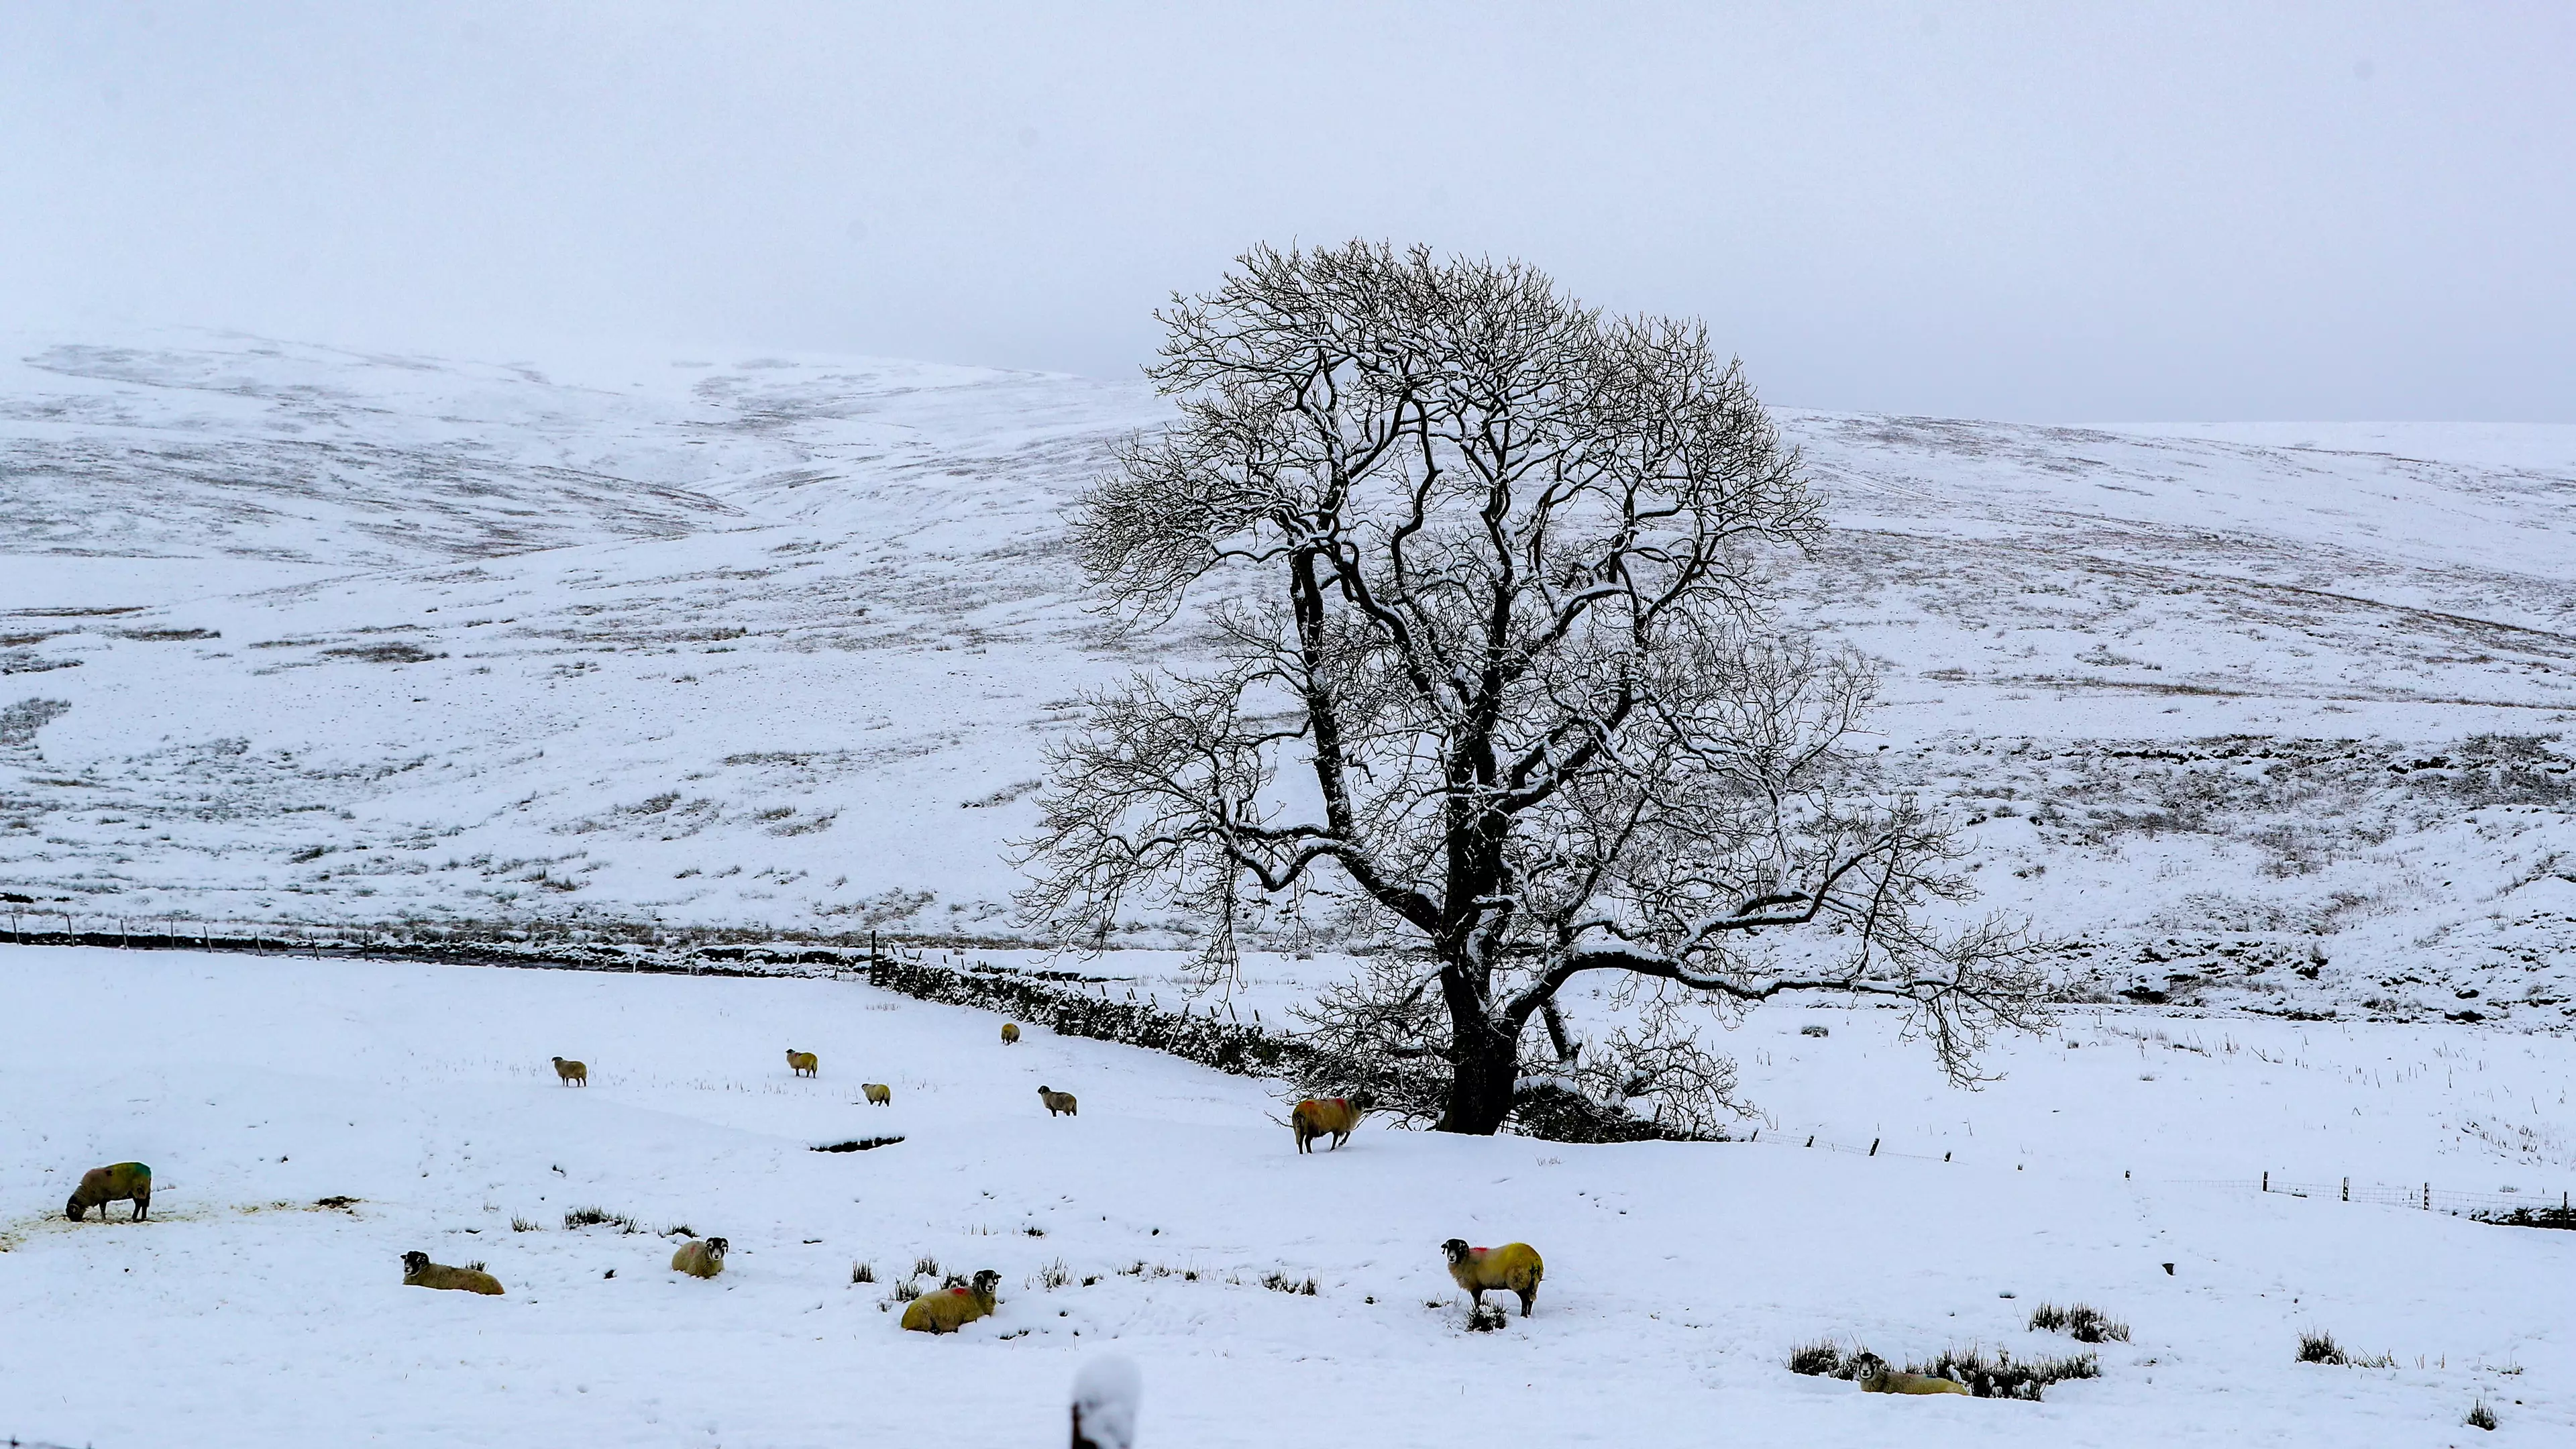 Snow Could Disappear From UK By The End Of Century, Met Office Warns